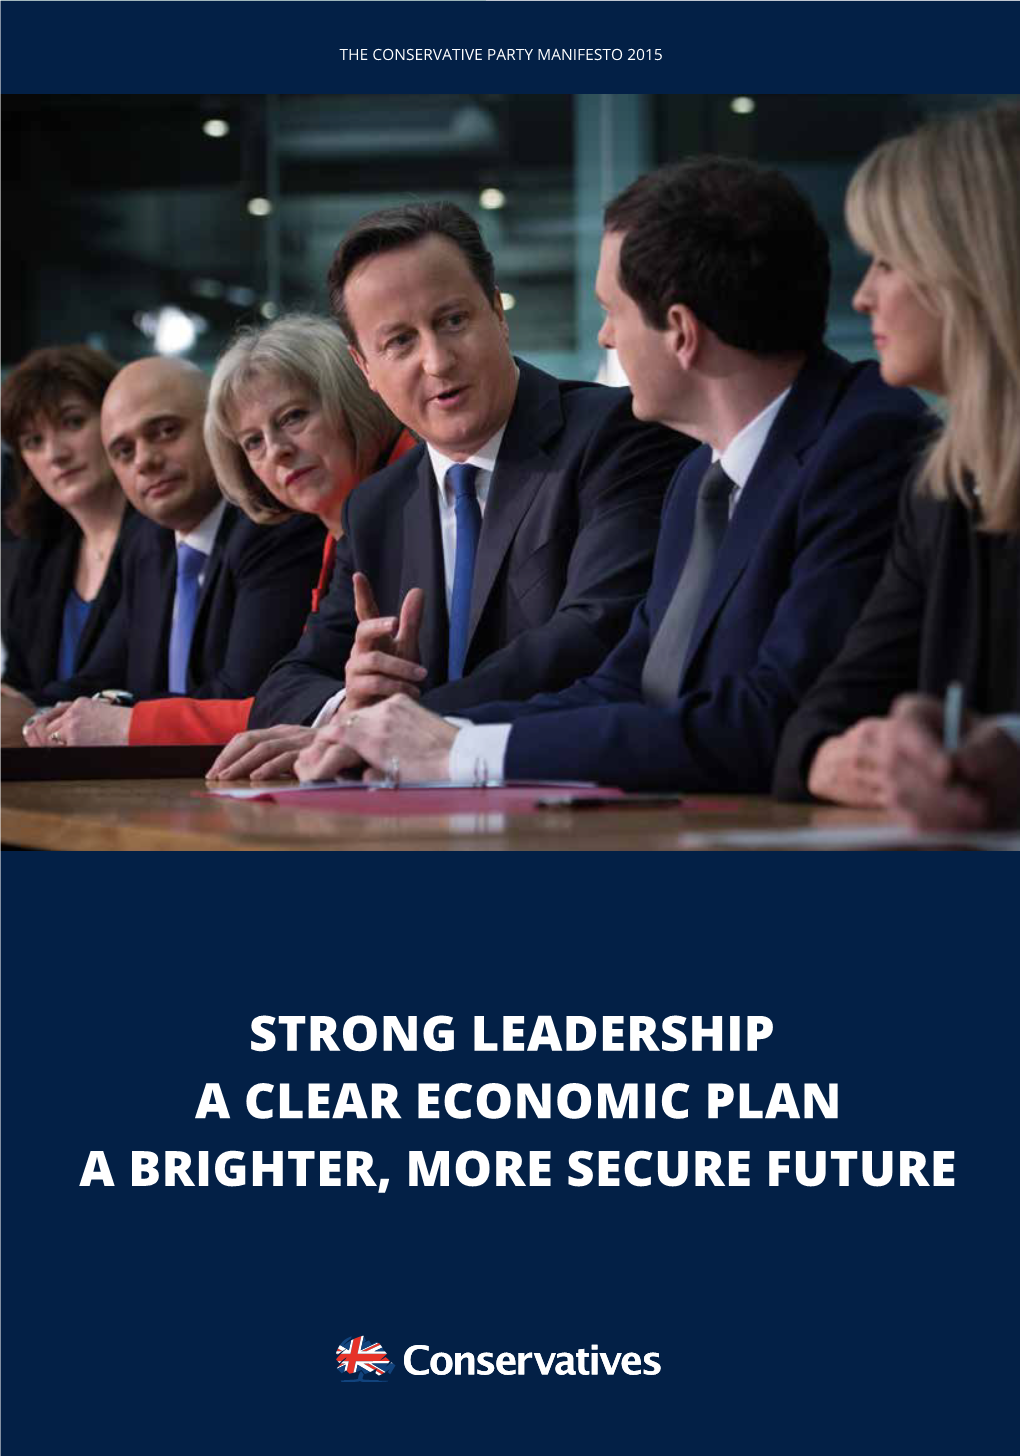 The Conservative Party Manifesto 2015 the Conservative Party Manifesto 201 5 the Conservative Party Manifesto 2015